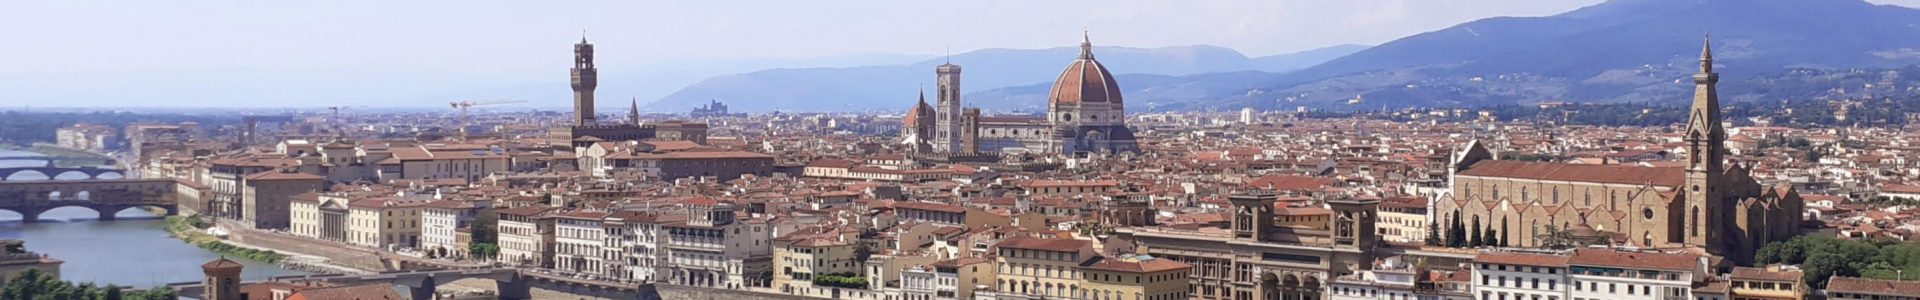 Expecting to be astonished in Florence in 2022!